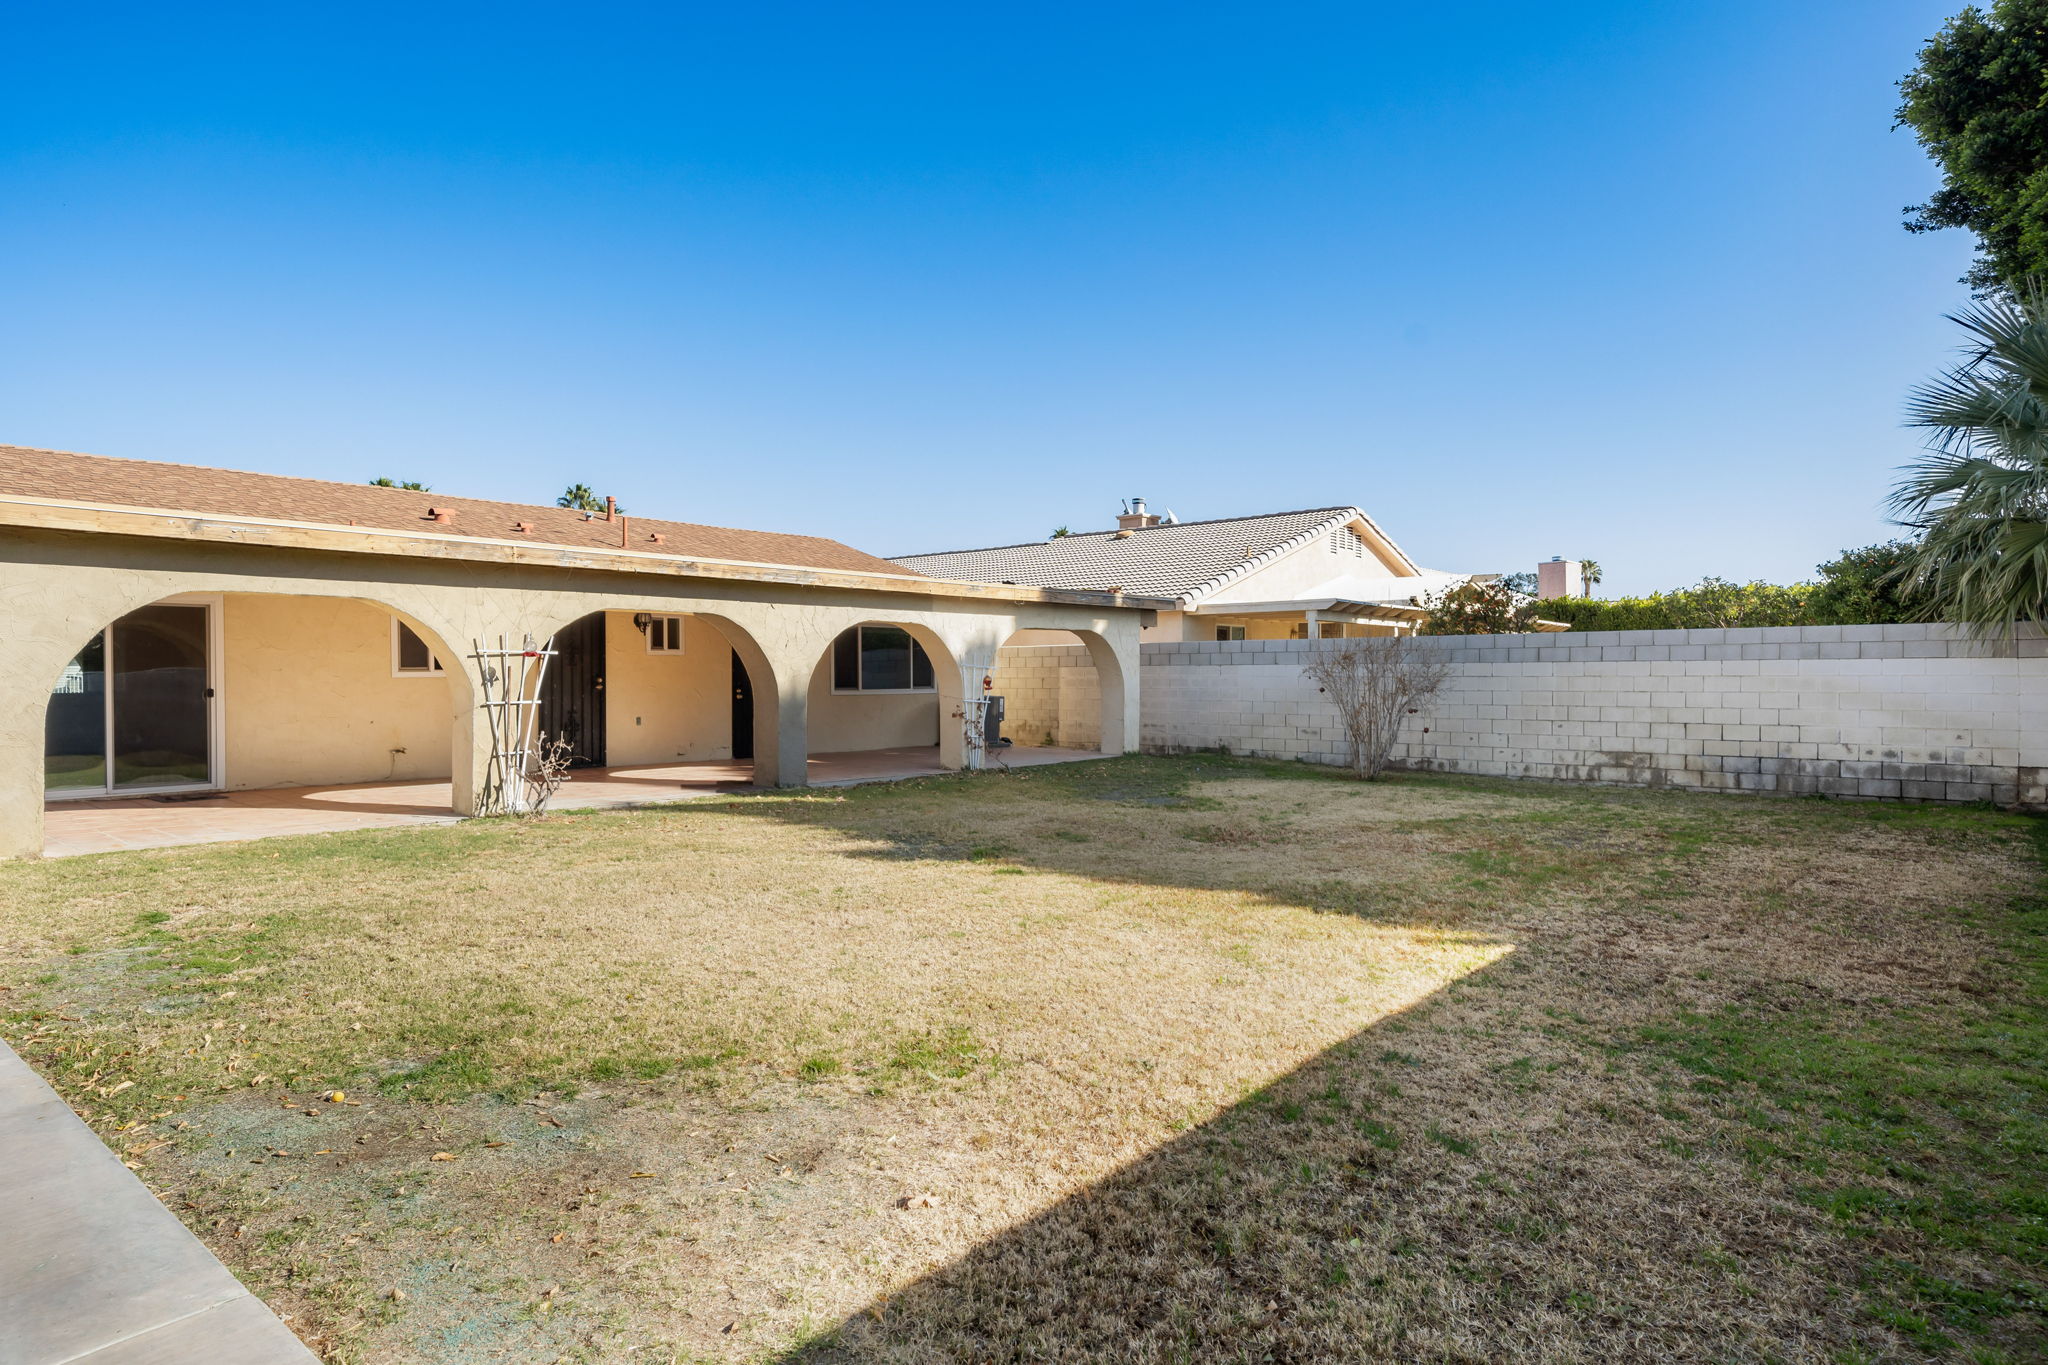  68545 Tachevah Dr, Cathedral City, CA 92234, US Photo 20